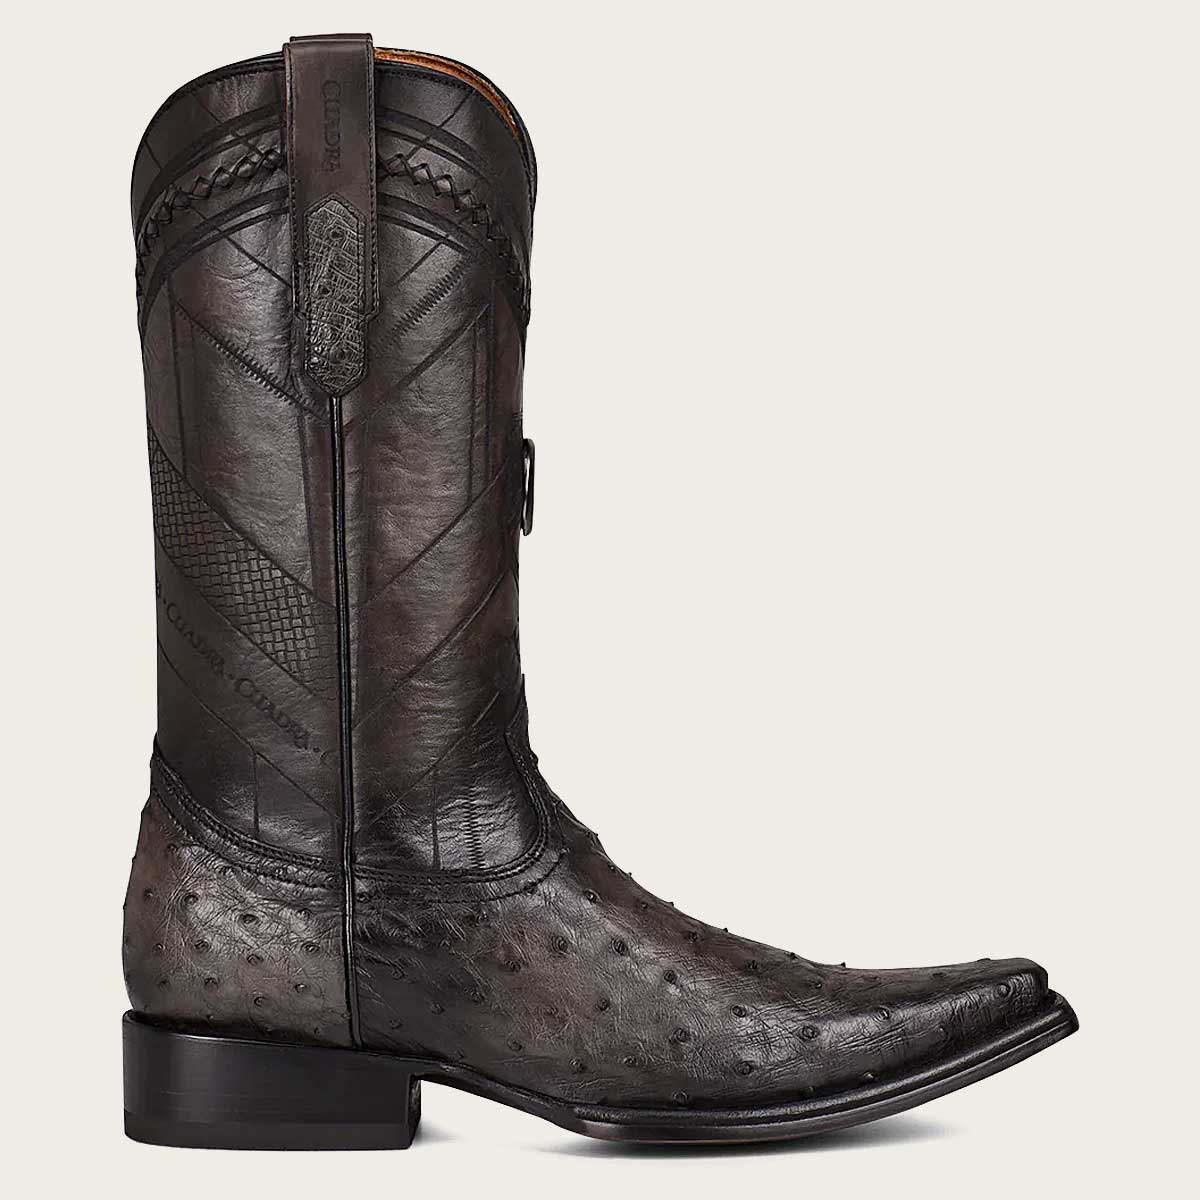 Impress with these boots featuring laser-engraved details and hand-woven elements for an exquisite touc